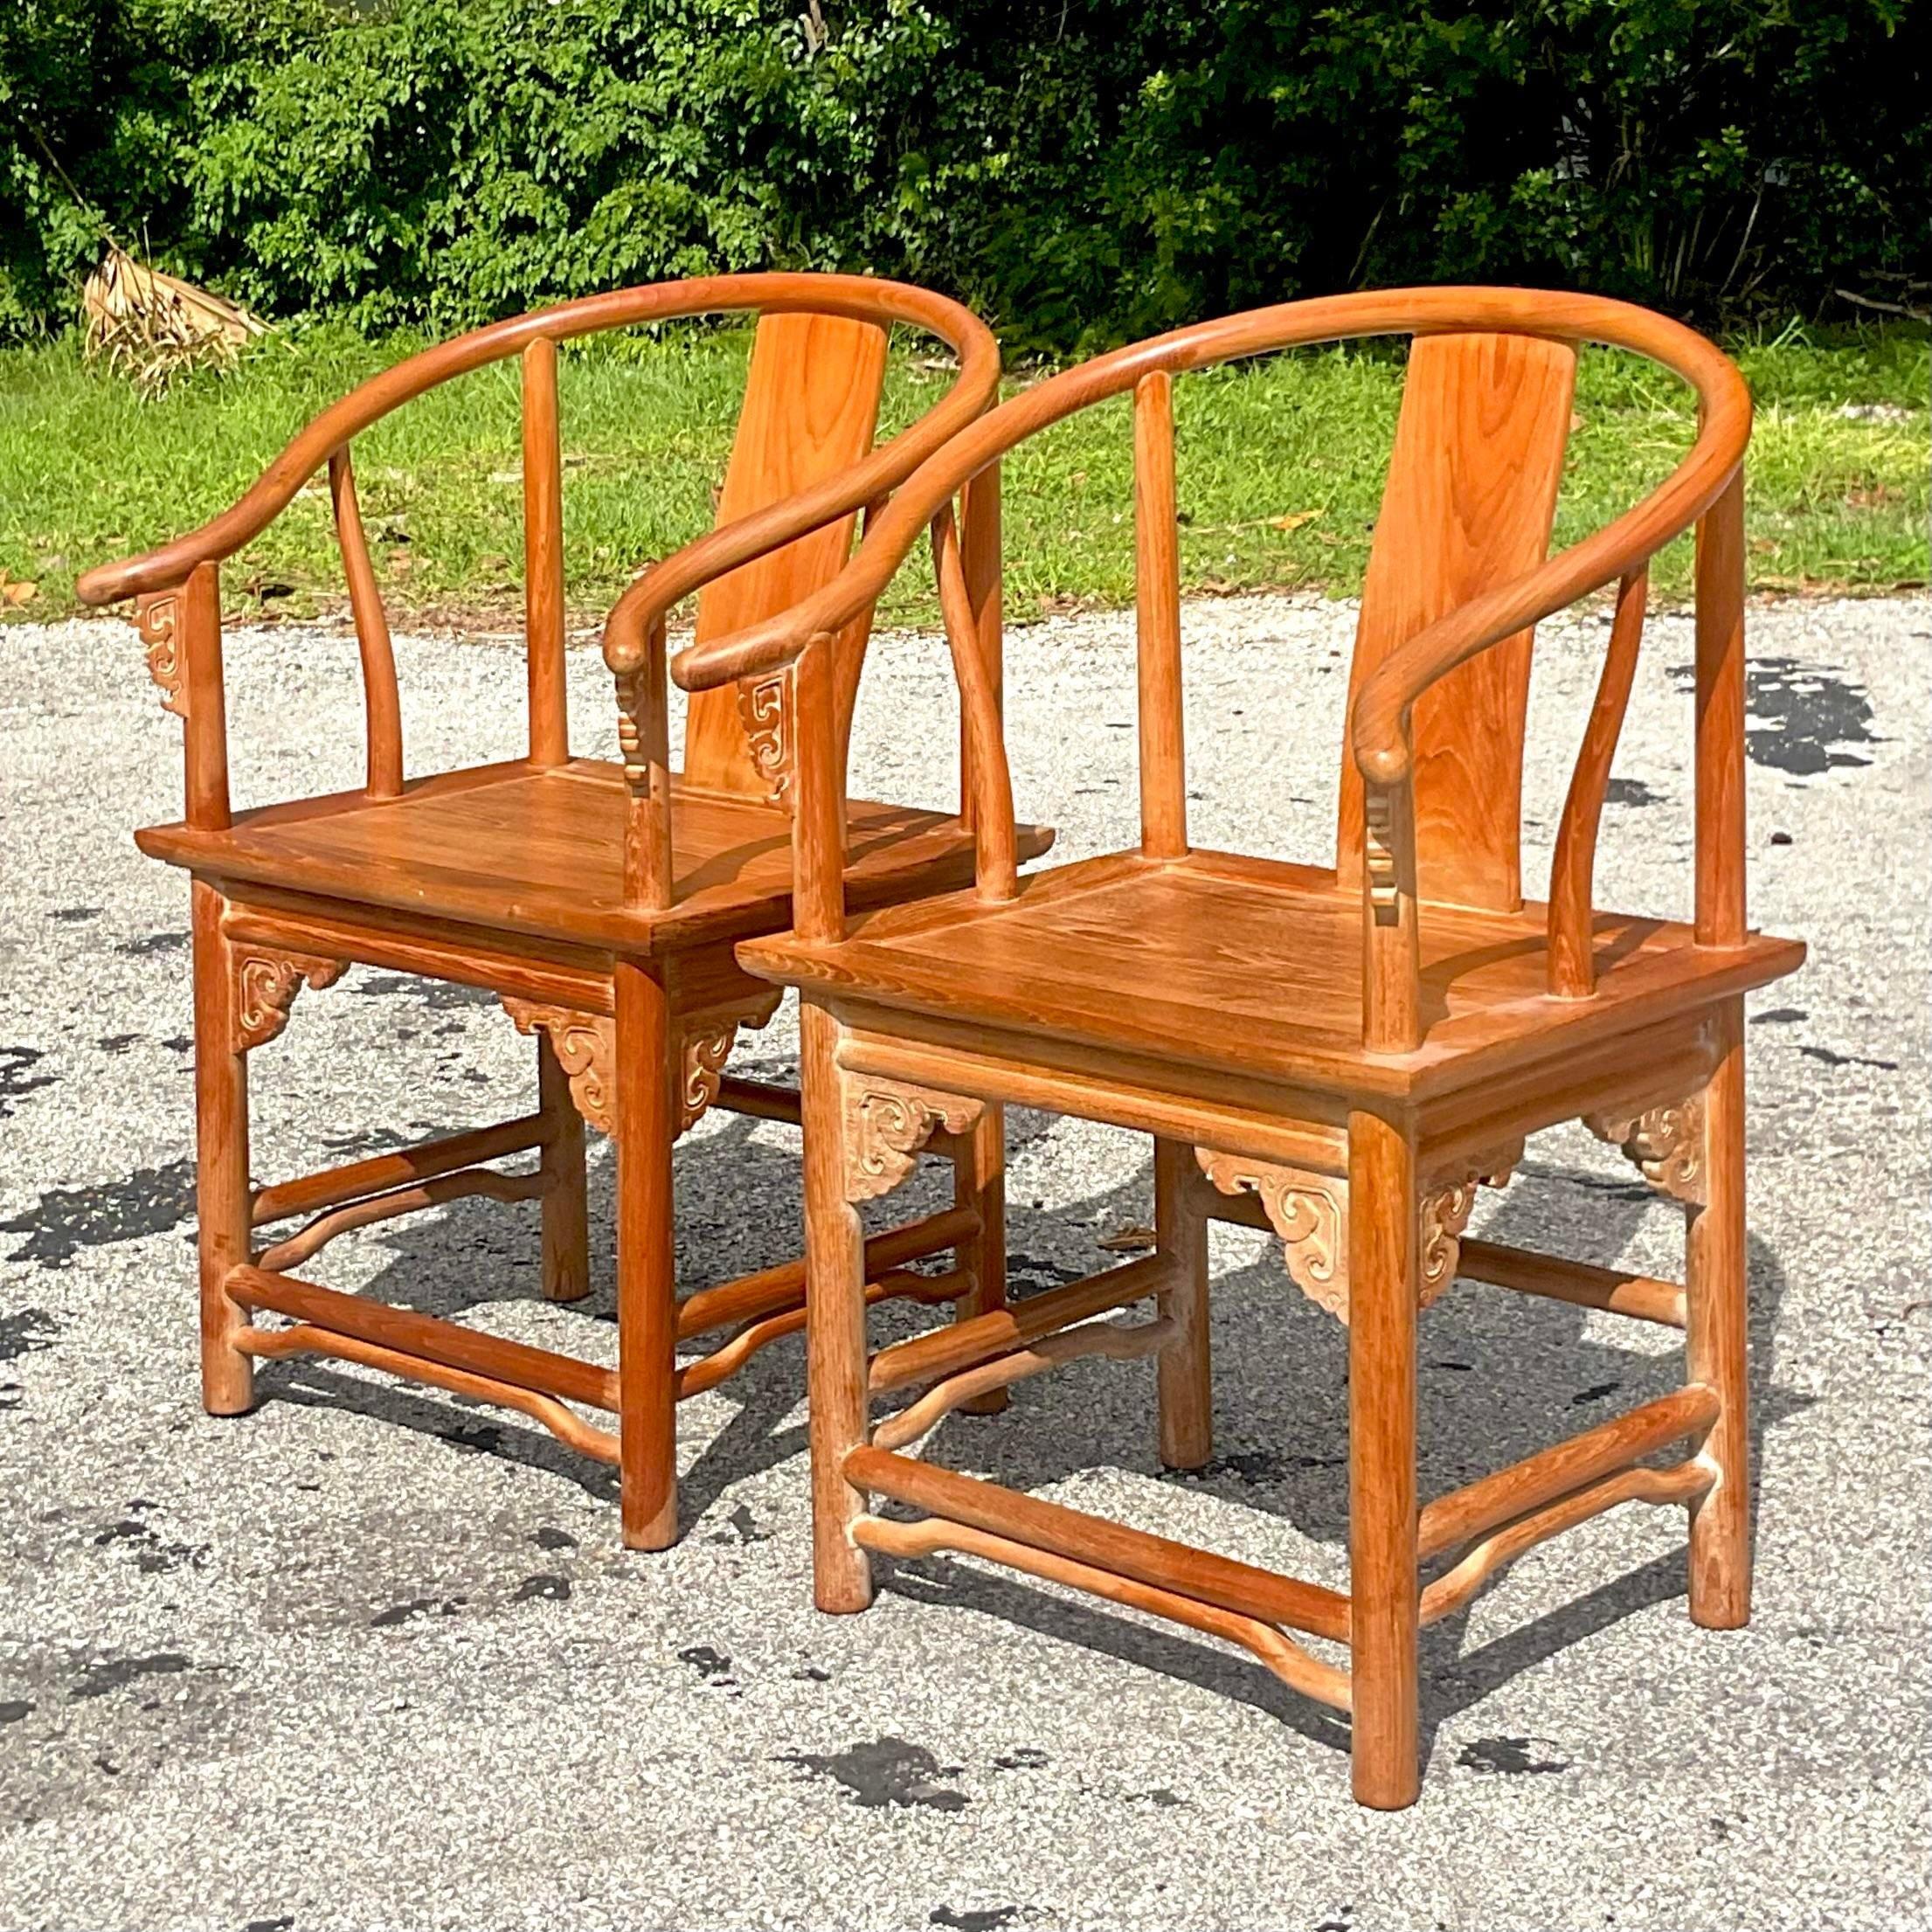 A fabulous pair of vintage Boho chairs. A chic high back Emperors style in a teak wood with a cerused finish. Contemporary, but classic at the same time. Acquired from a Palm Beach estate.